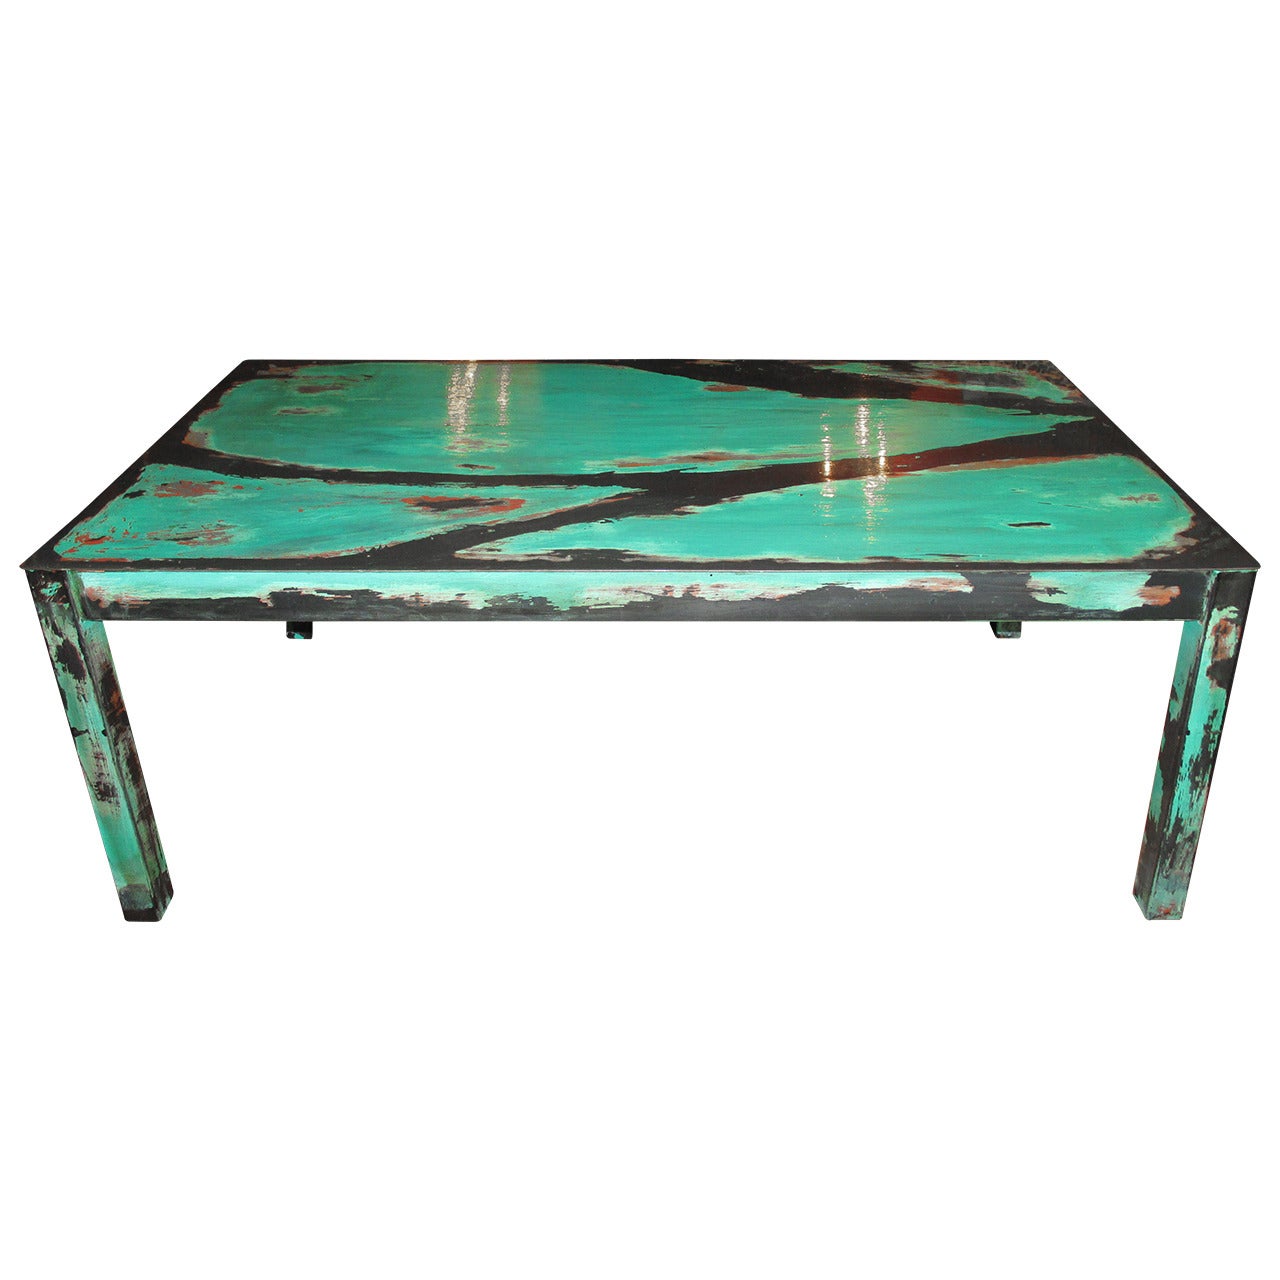 Artisan Crafted Turquoise Metal Coffee Table